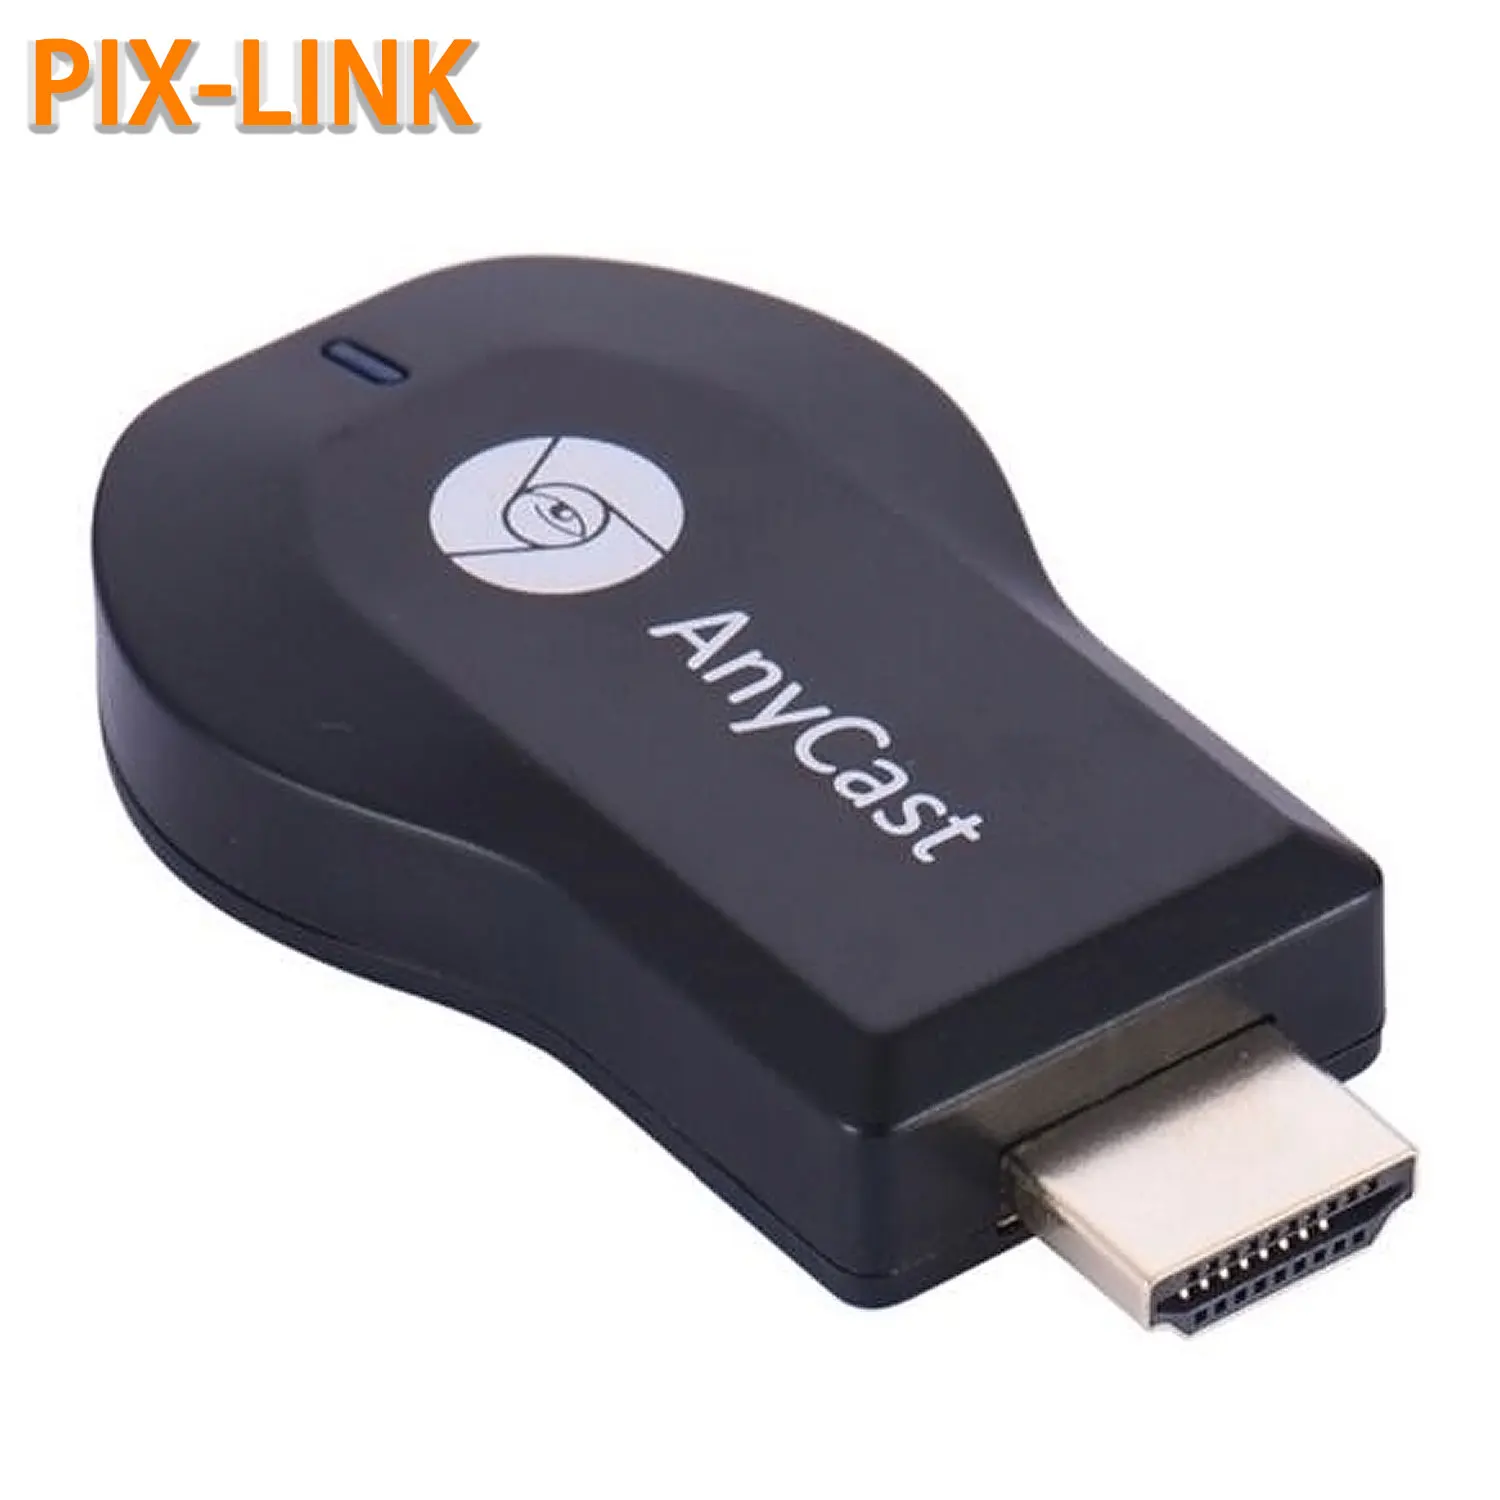 

Anycast M100 2.4G/5G 4K Miracast Any Cast Wireless DLNA AirPlay TV Stick Wifi Display Dongle Receiver for IOS Android PC